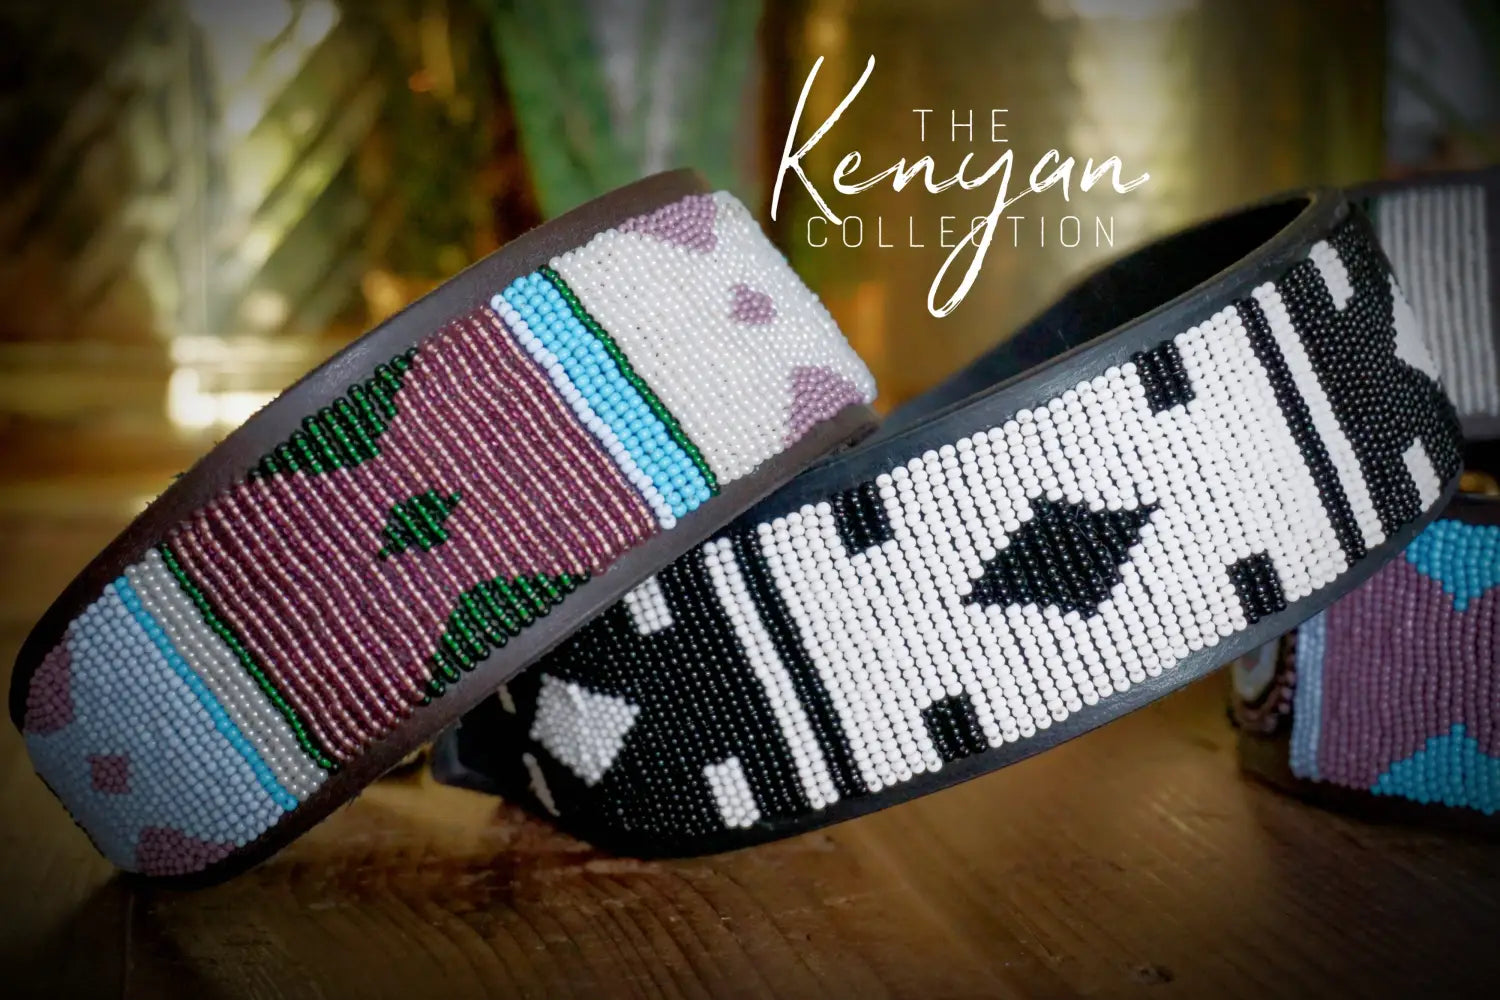 The Kenyan Collection